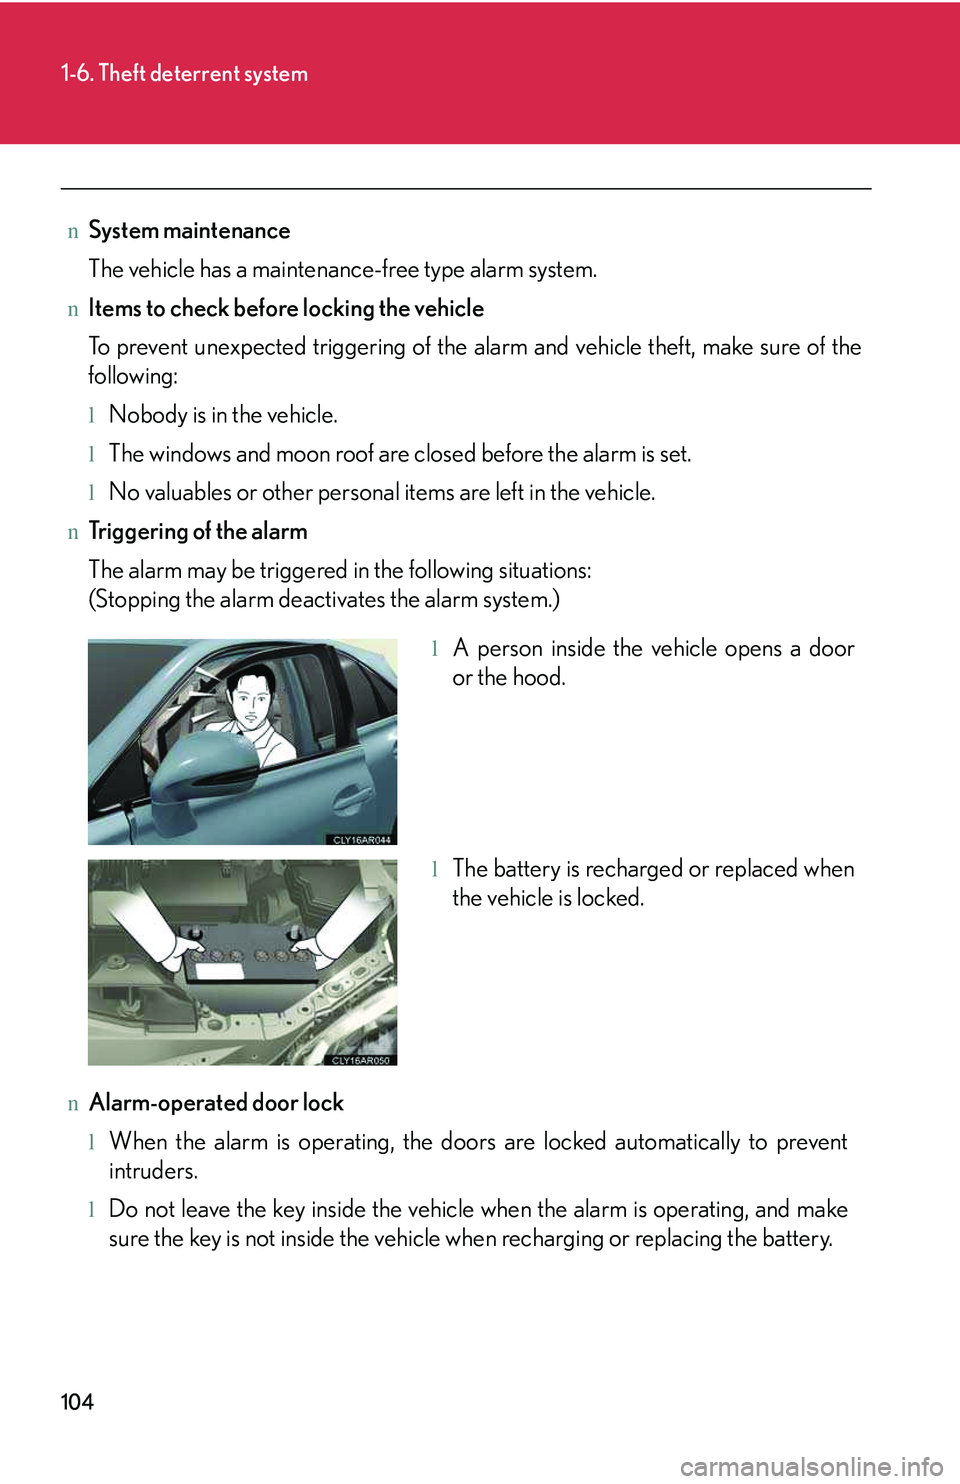 LEXUS RX350 2011  Owners Manual 104
1-6. Theft deterrent system
nSystem maintenance
The vehicle has a maintenance-free type alarm system.
nItems to check before locking the vehicle
To prevent unexpected triggering of the alarm and v